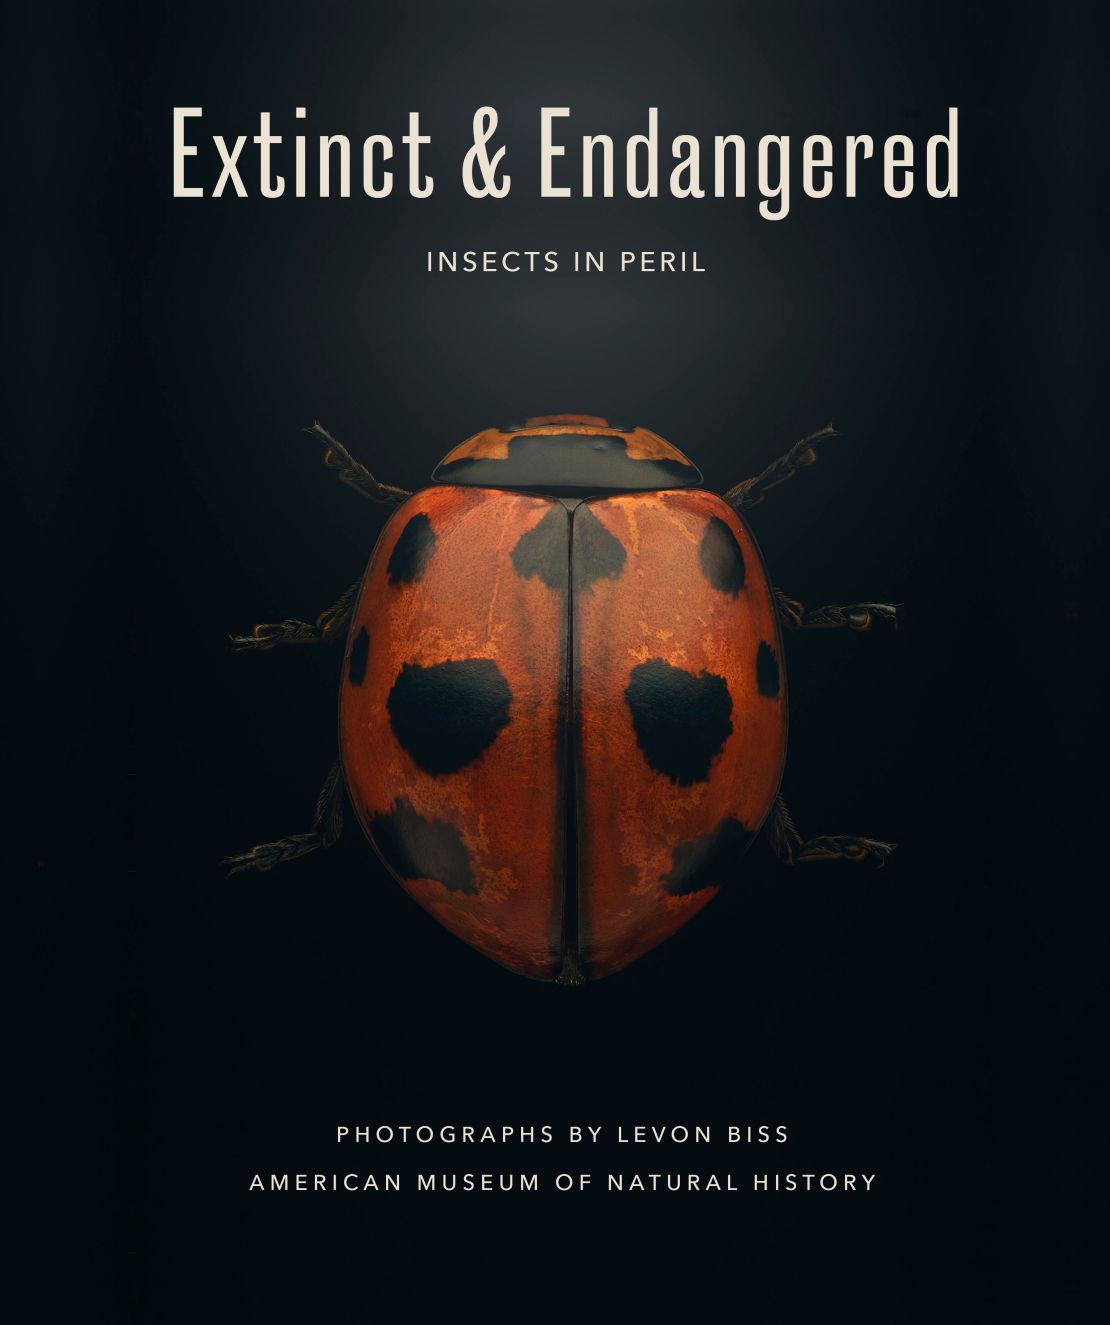 "Extinct & Endangered: Insects in Peril" is out now in hardcover.